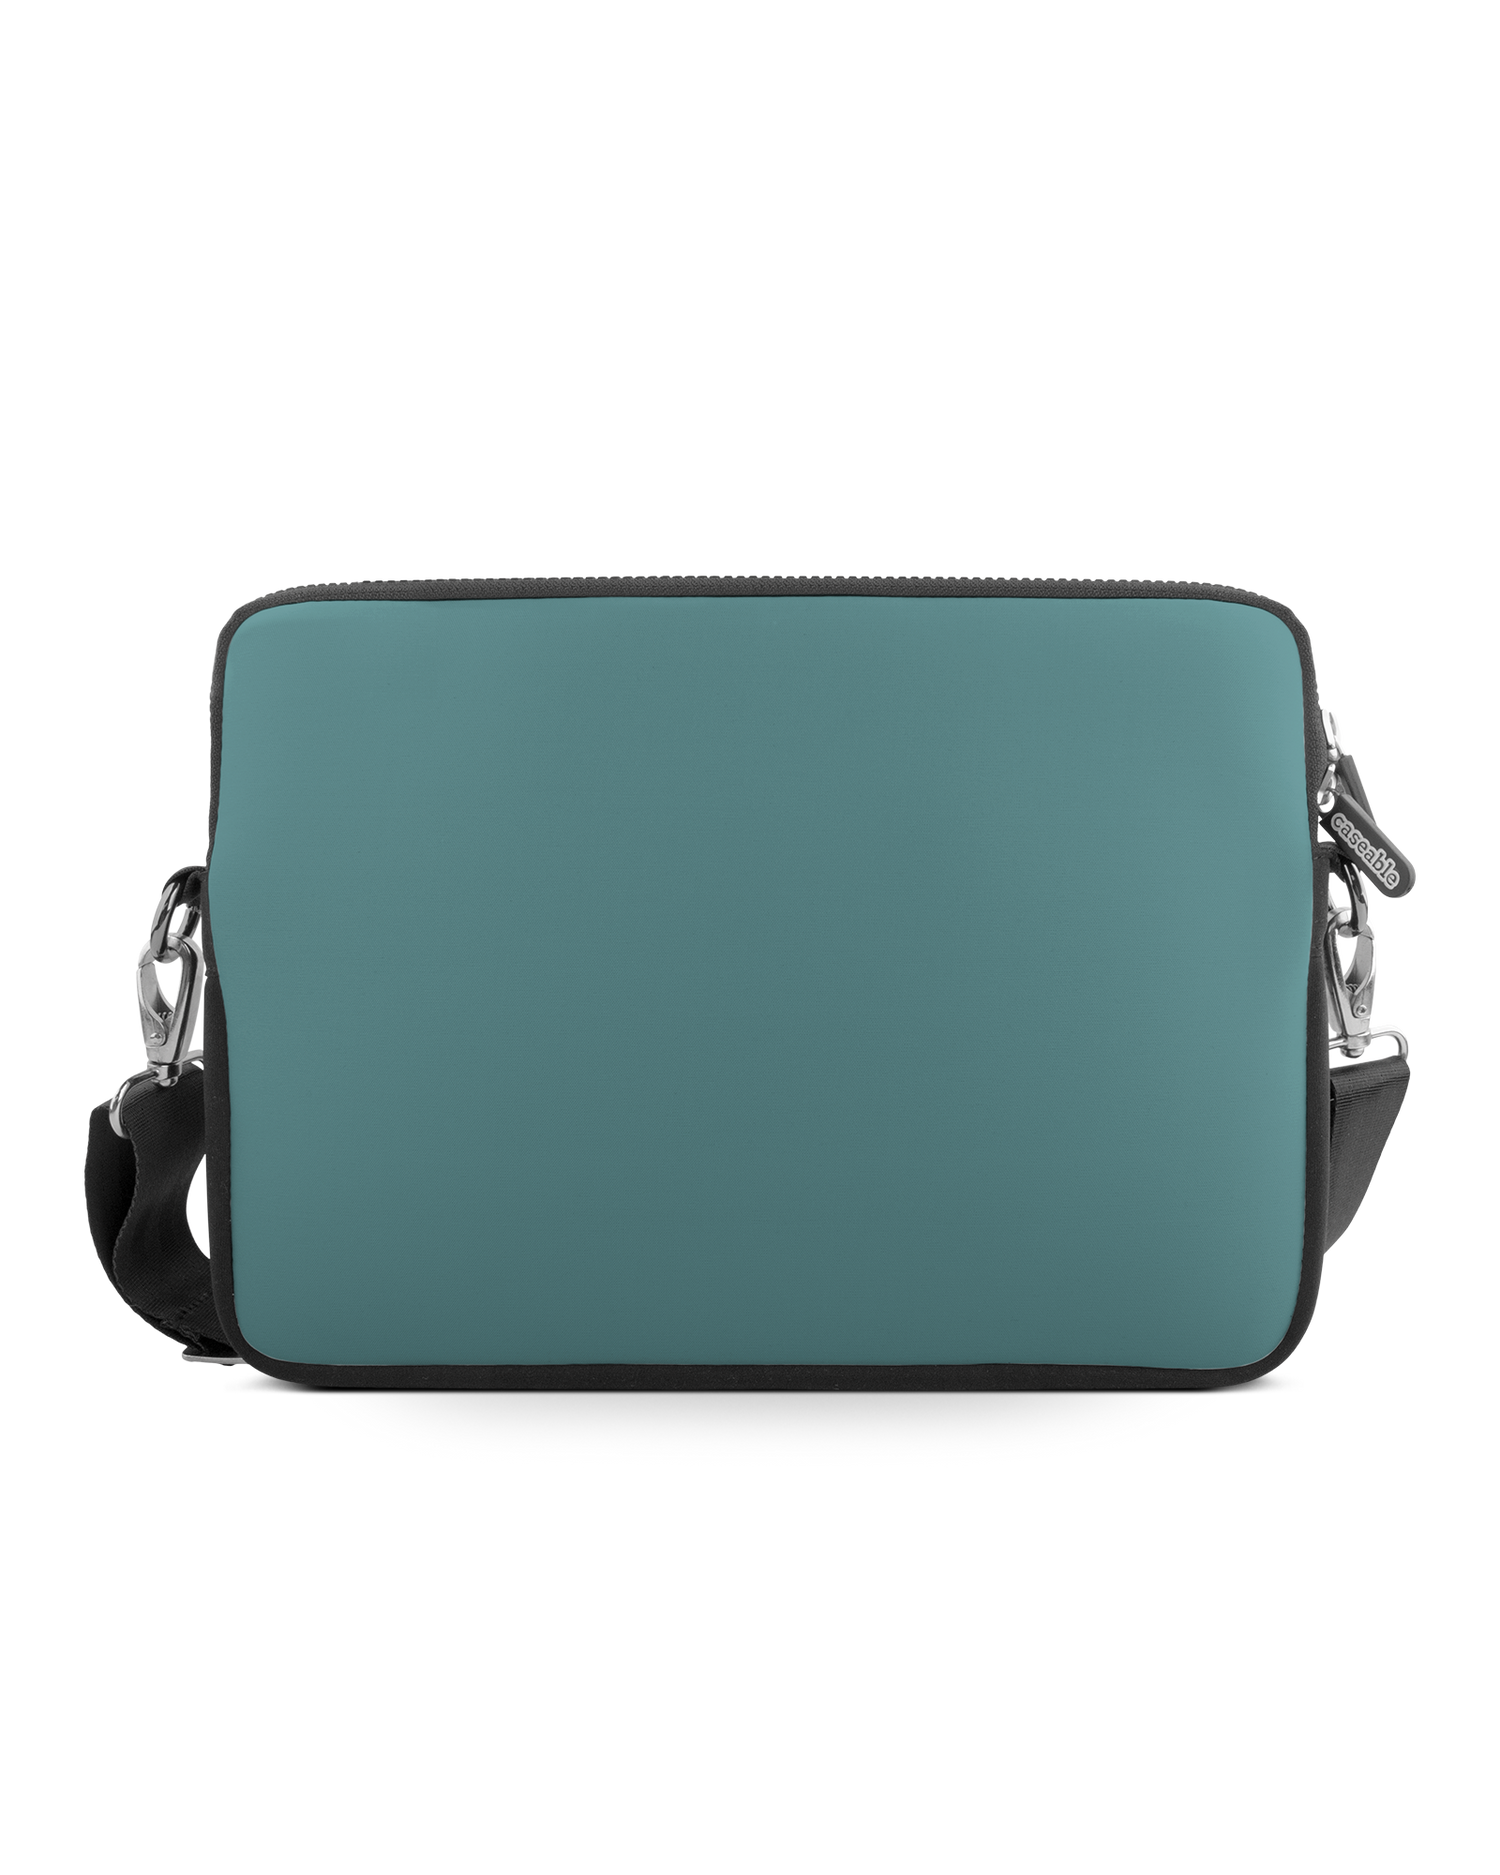 TURQUOISE Premium Laptop Bag 13 inch: Front View